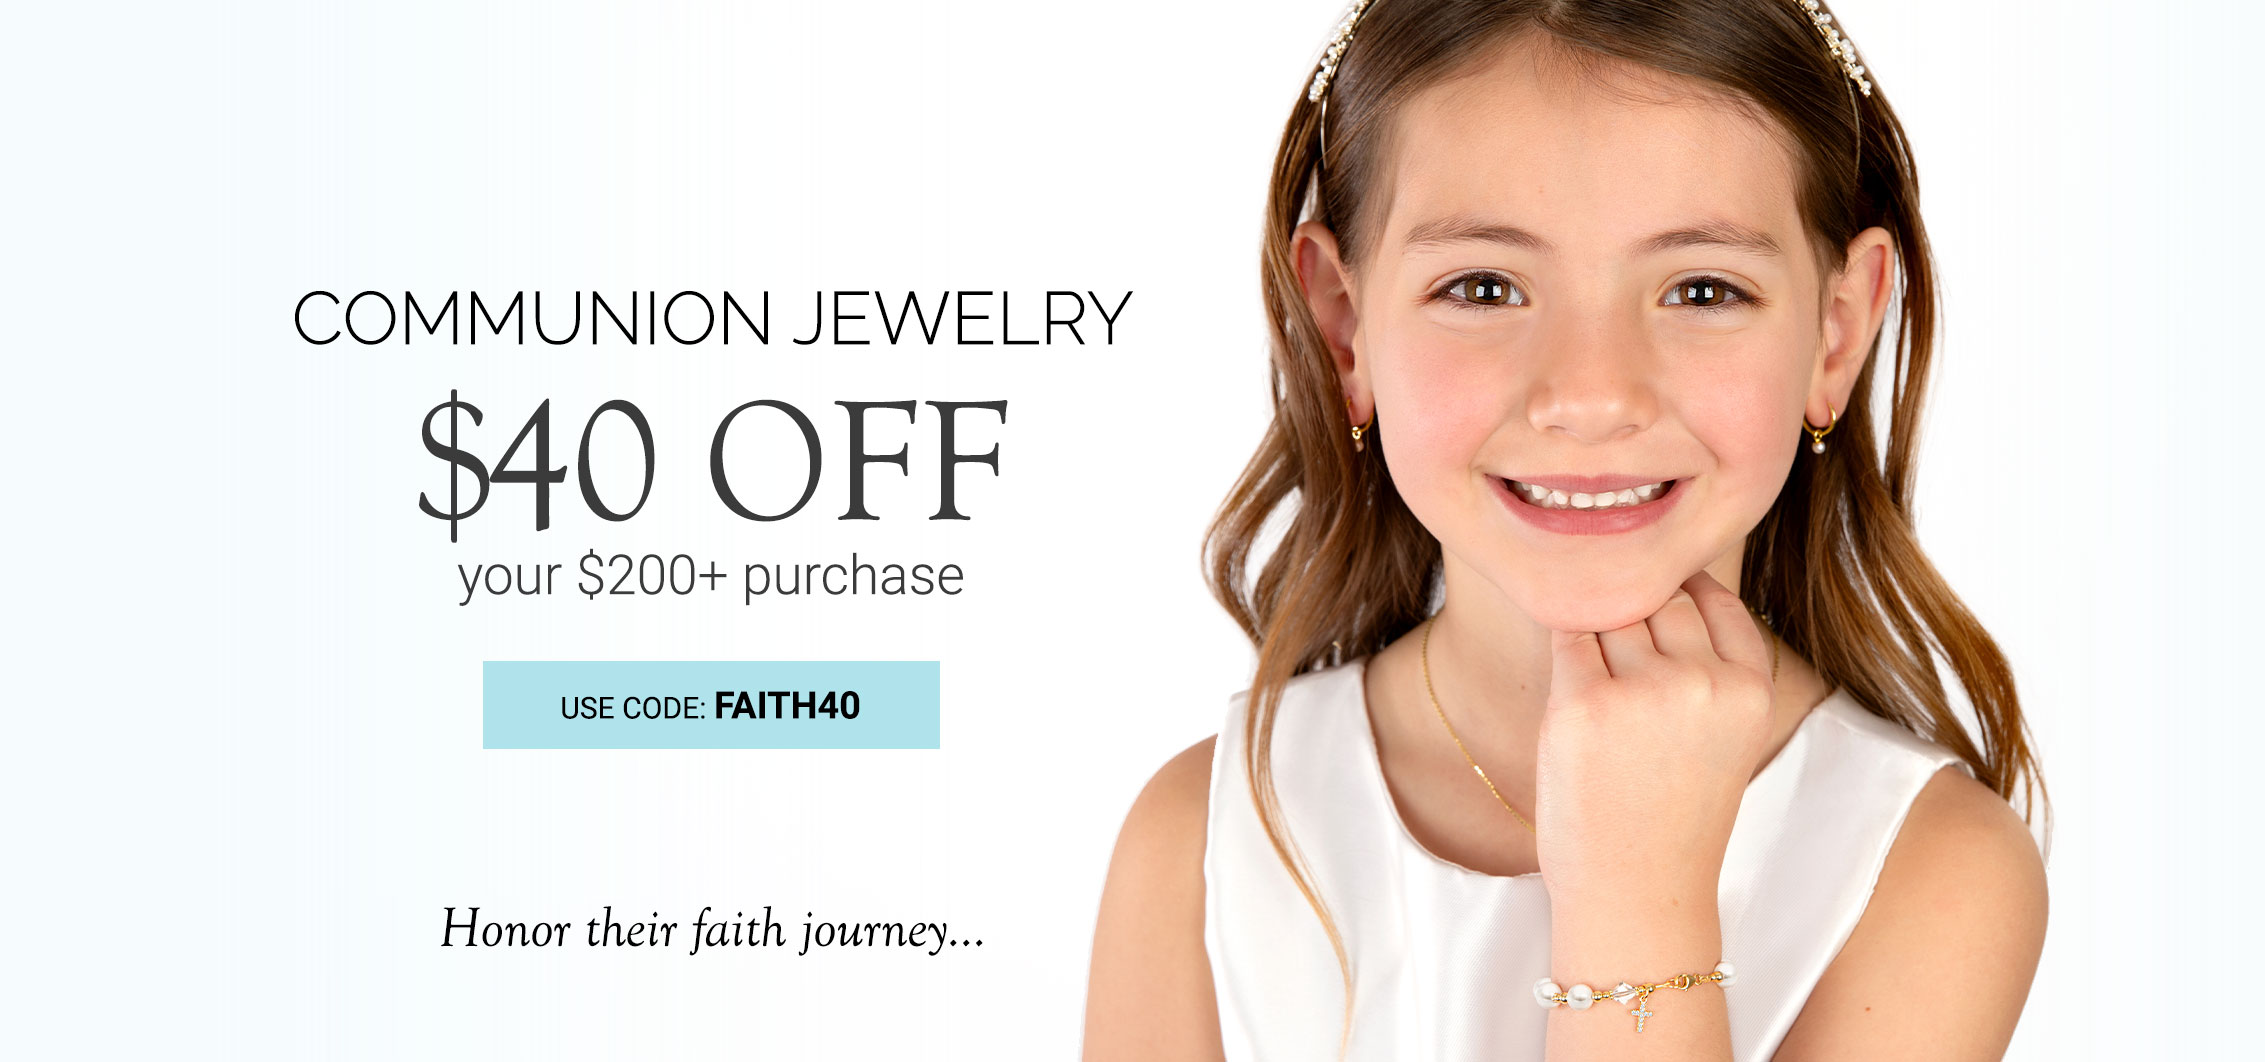 Jewelry Designed Specifically for Baby, Kids, & Children